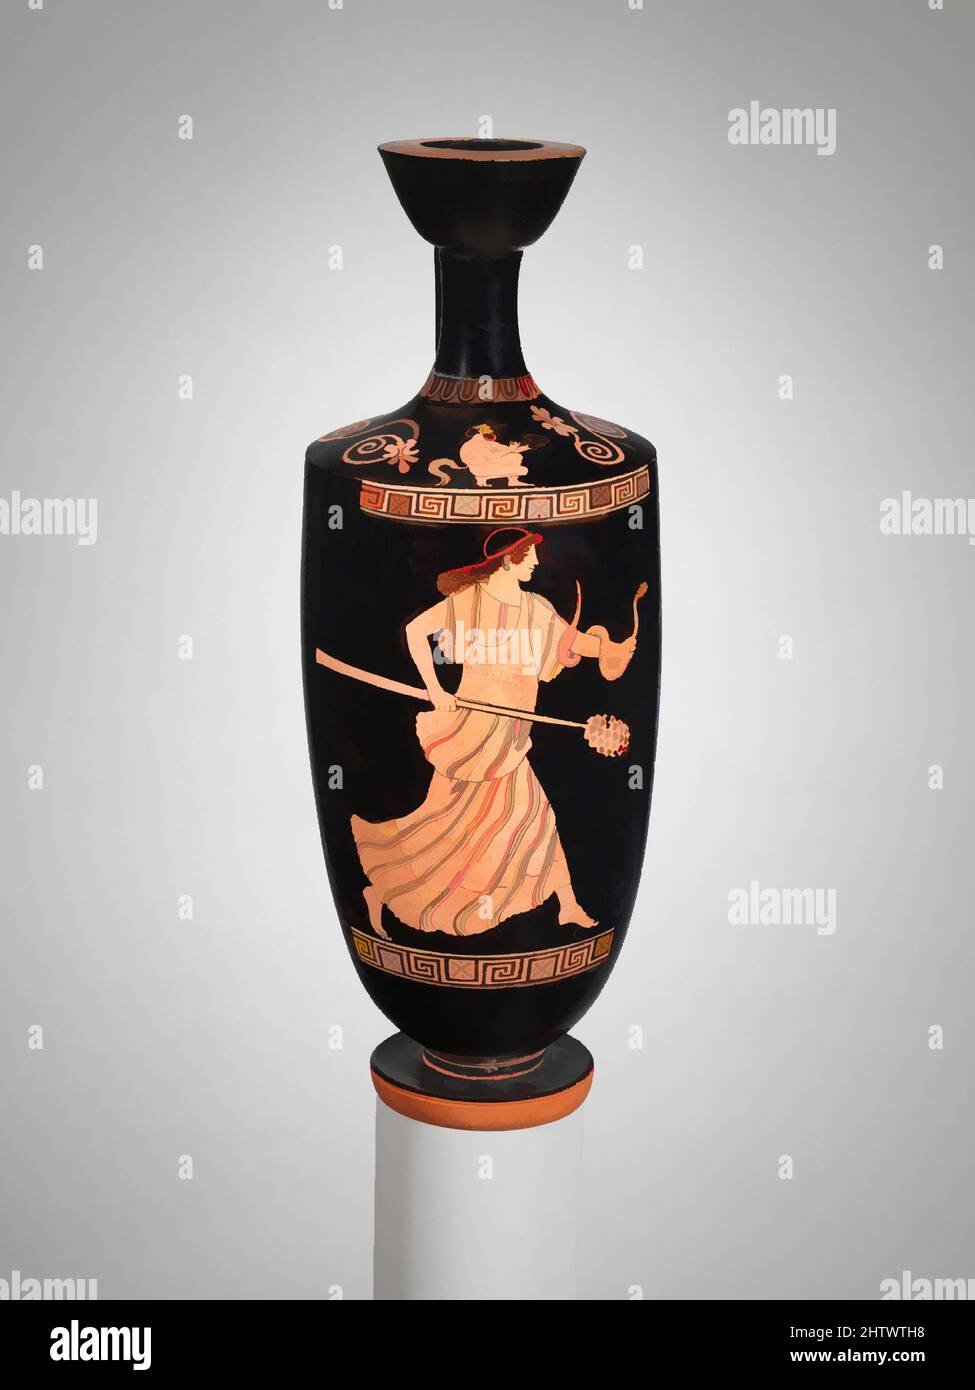 Ancient Greece Red Figure Vase All About That Grape Juice Greek